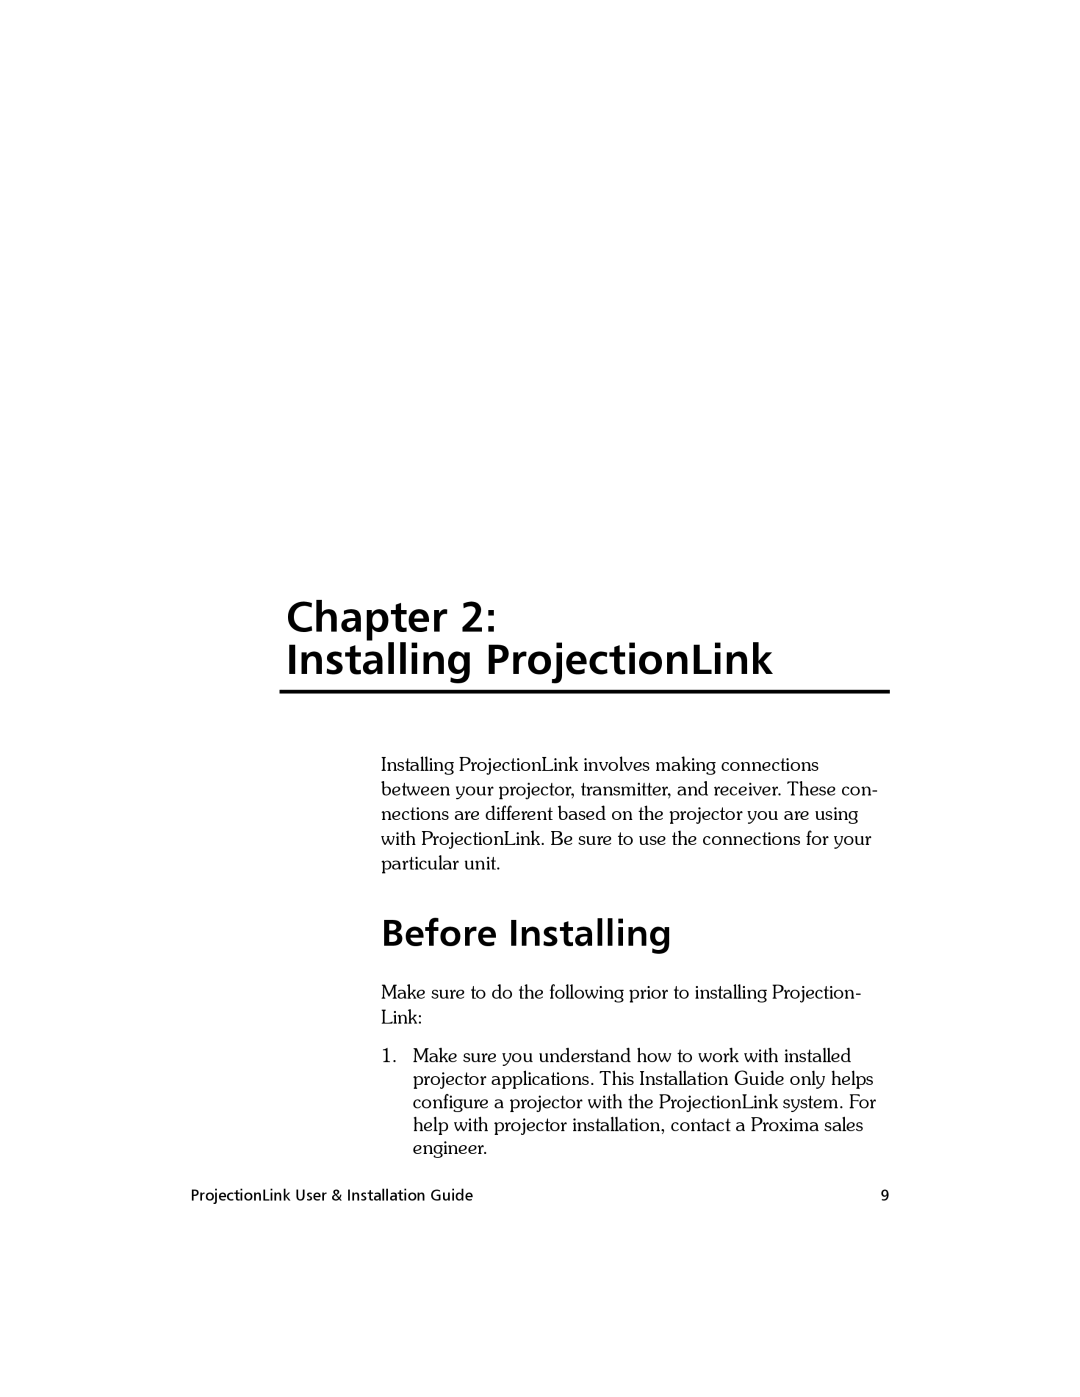 Proxima ASA PL-300E, BNDL-001 manual Chapter Installing ProjectionLink, Before Installing 